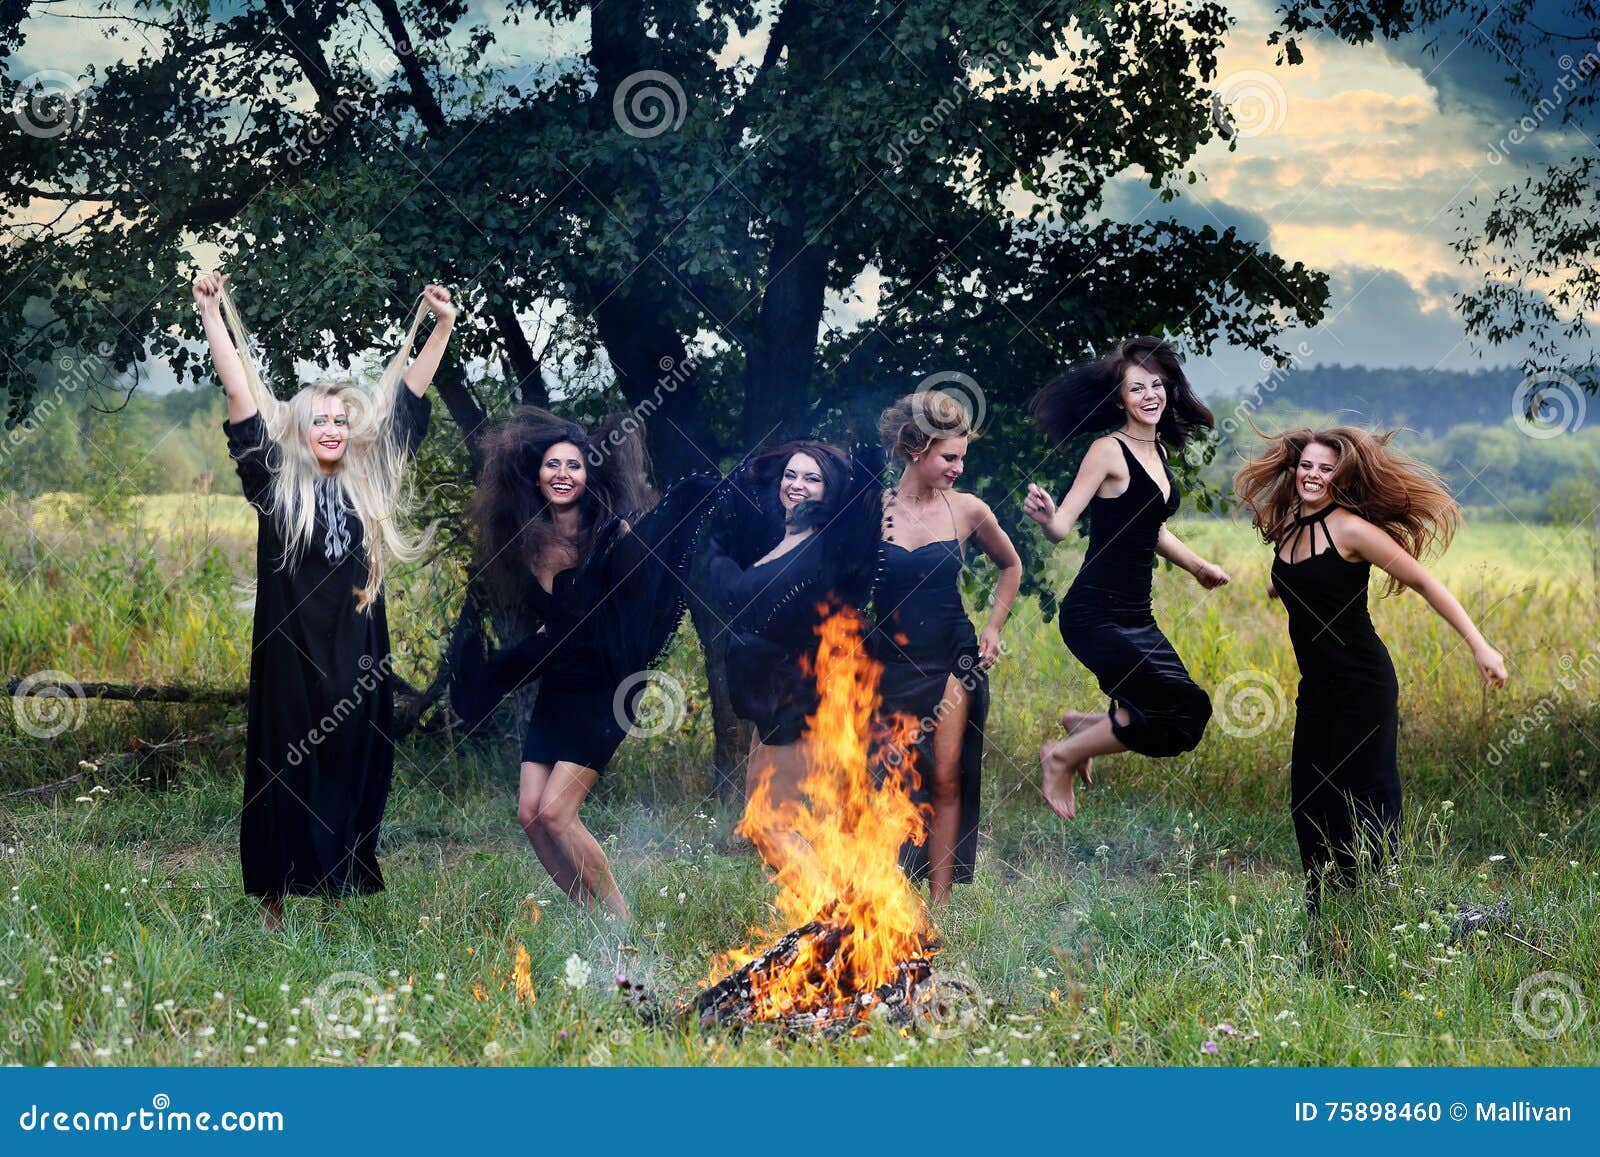 Witches around a fire